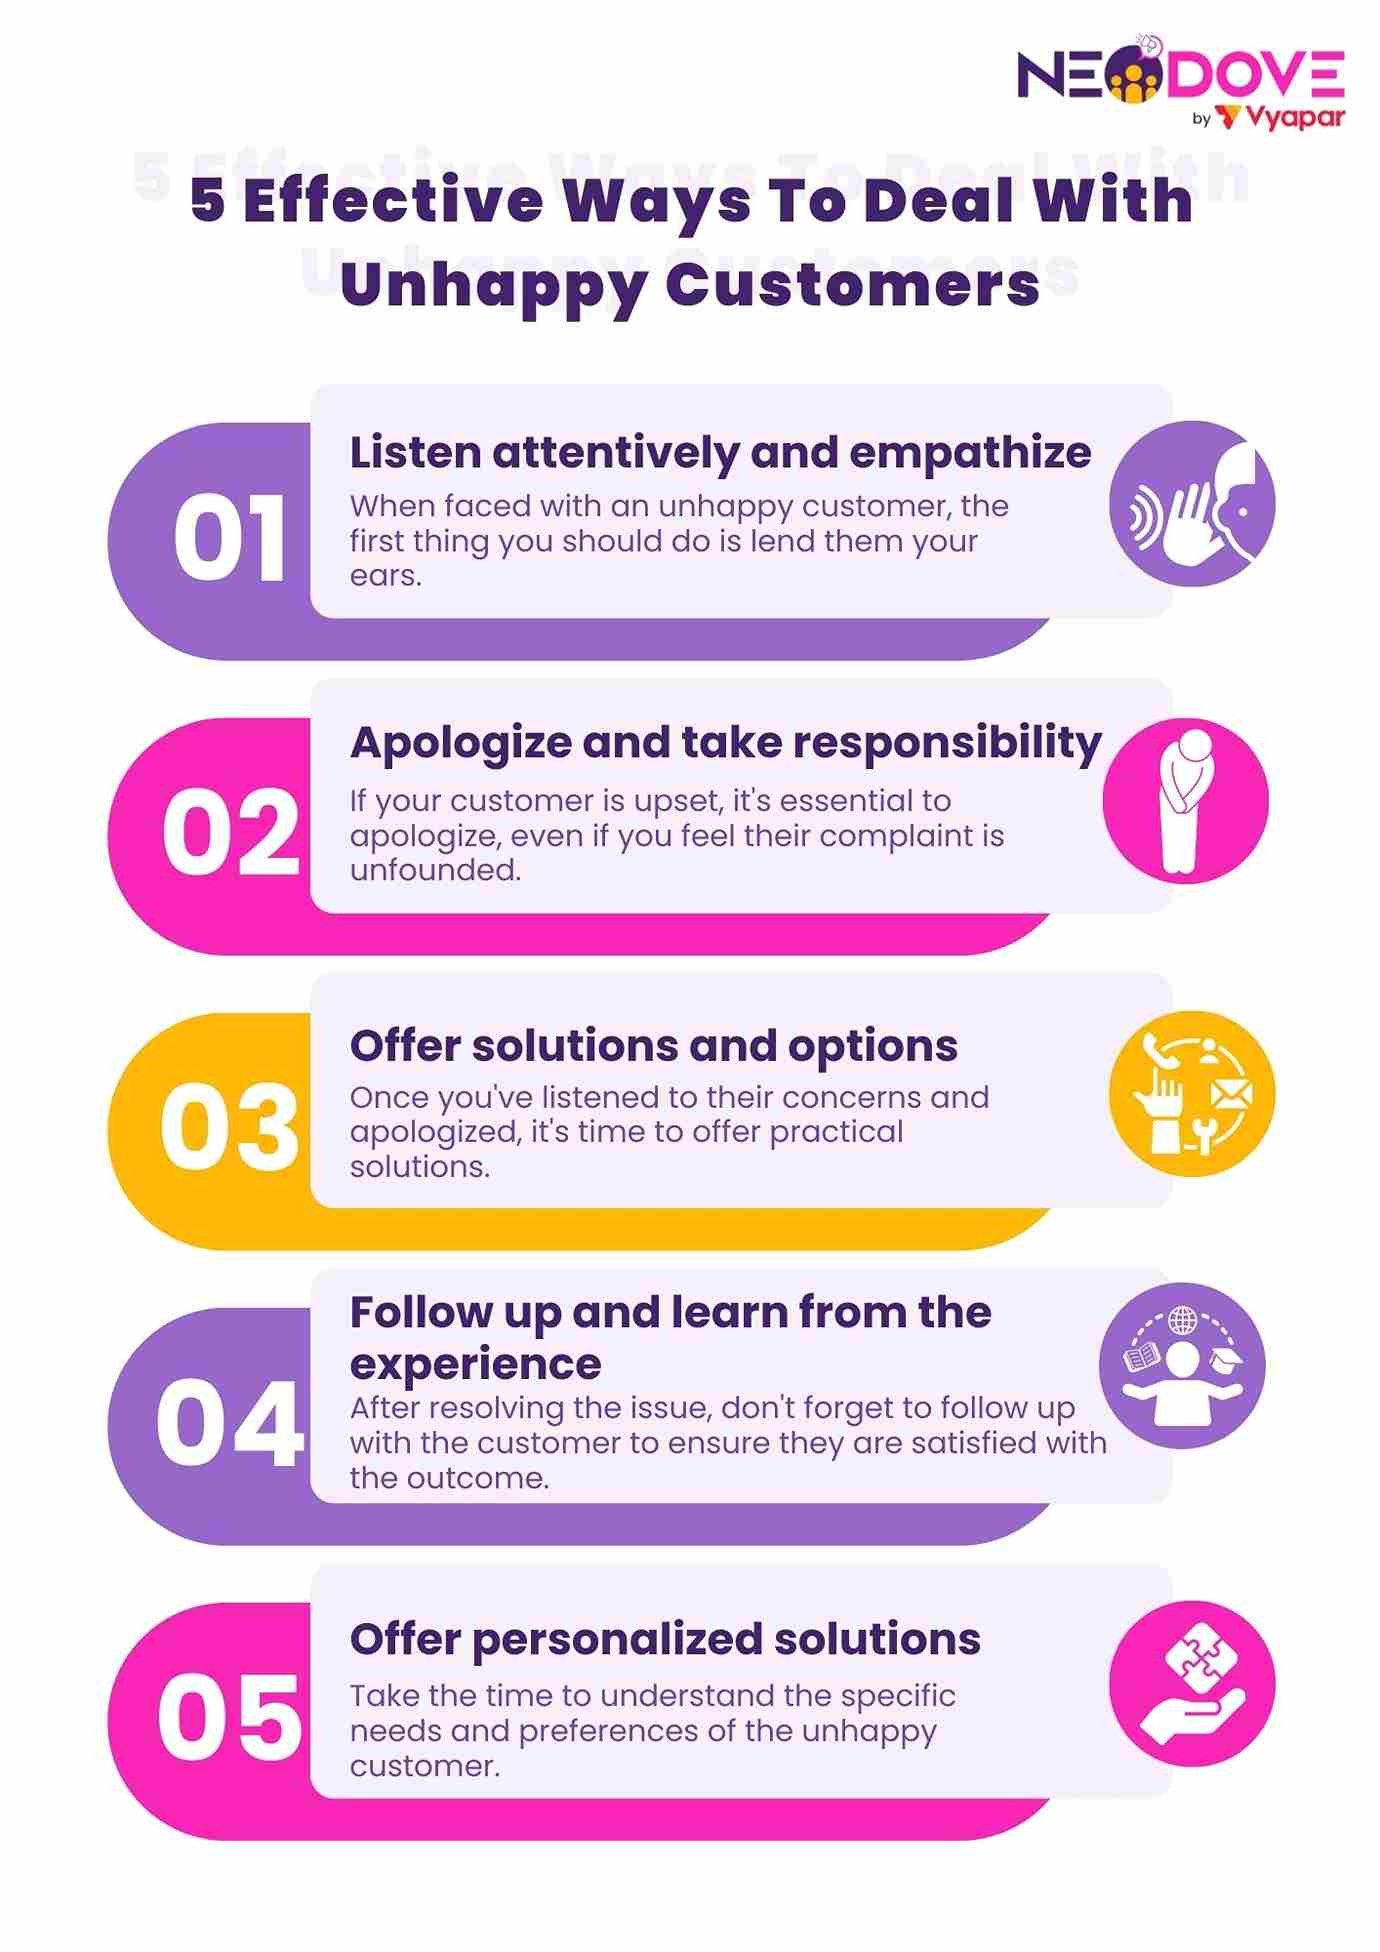 5 Effective Ways To Deal With Unhappy Customers - NeoDove